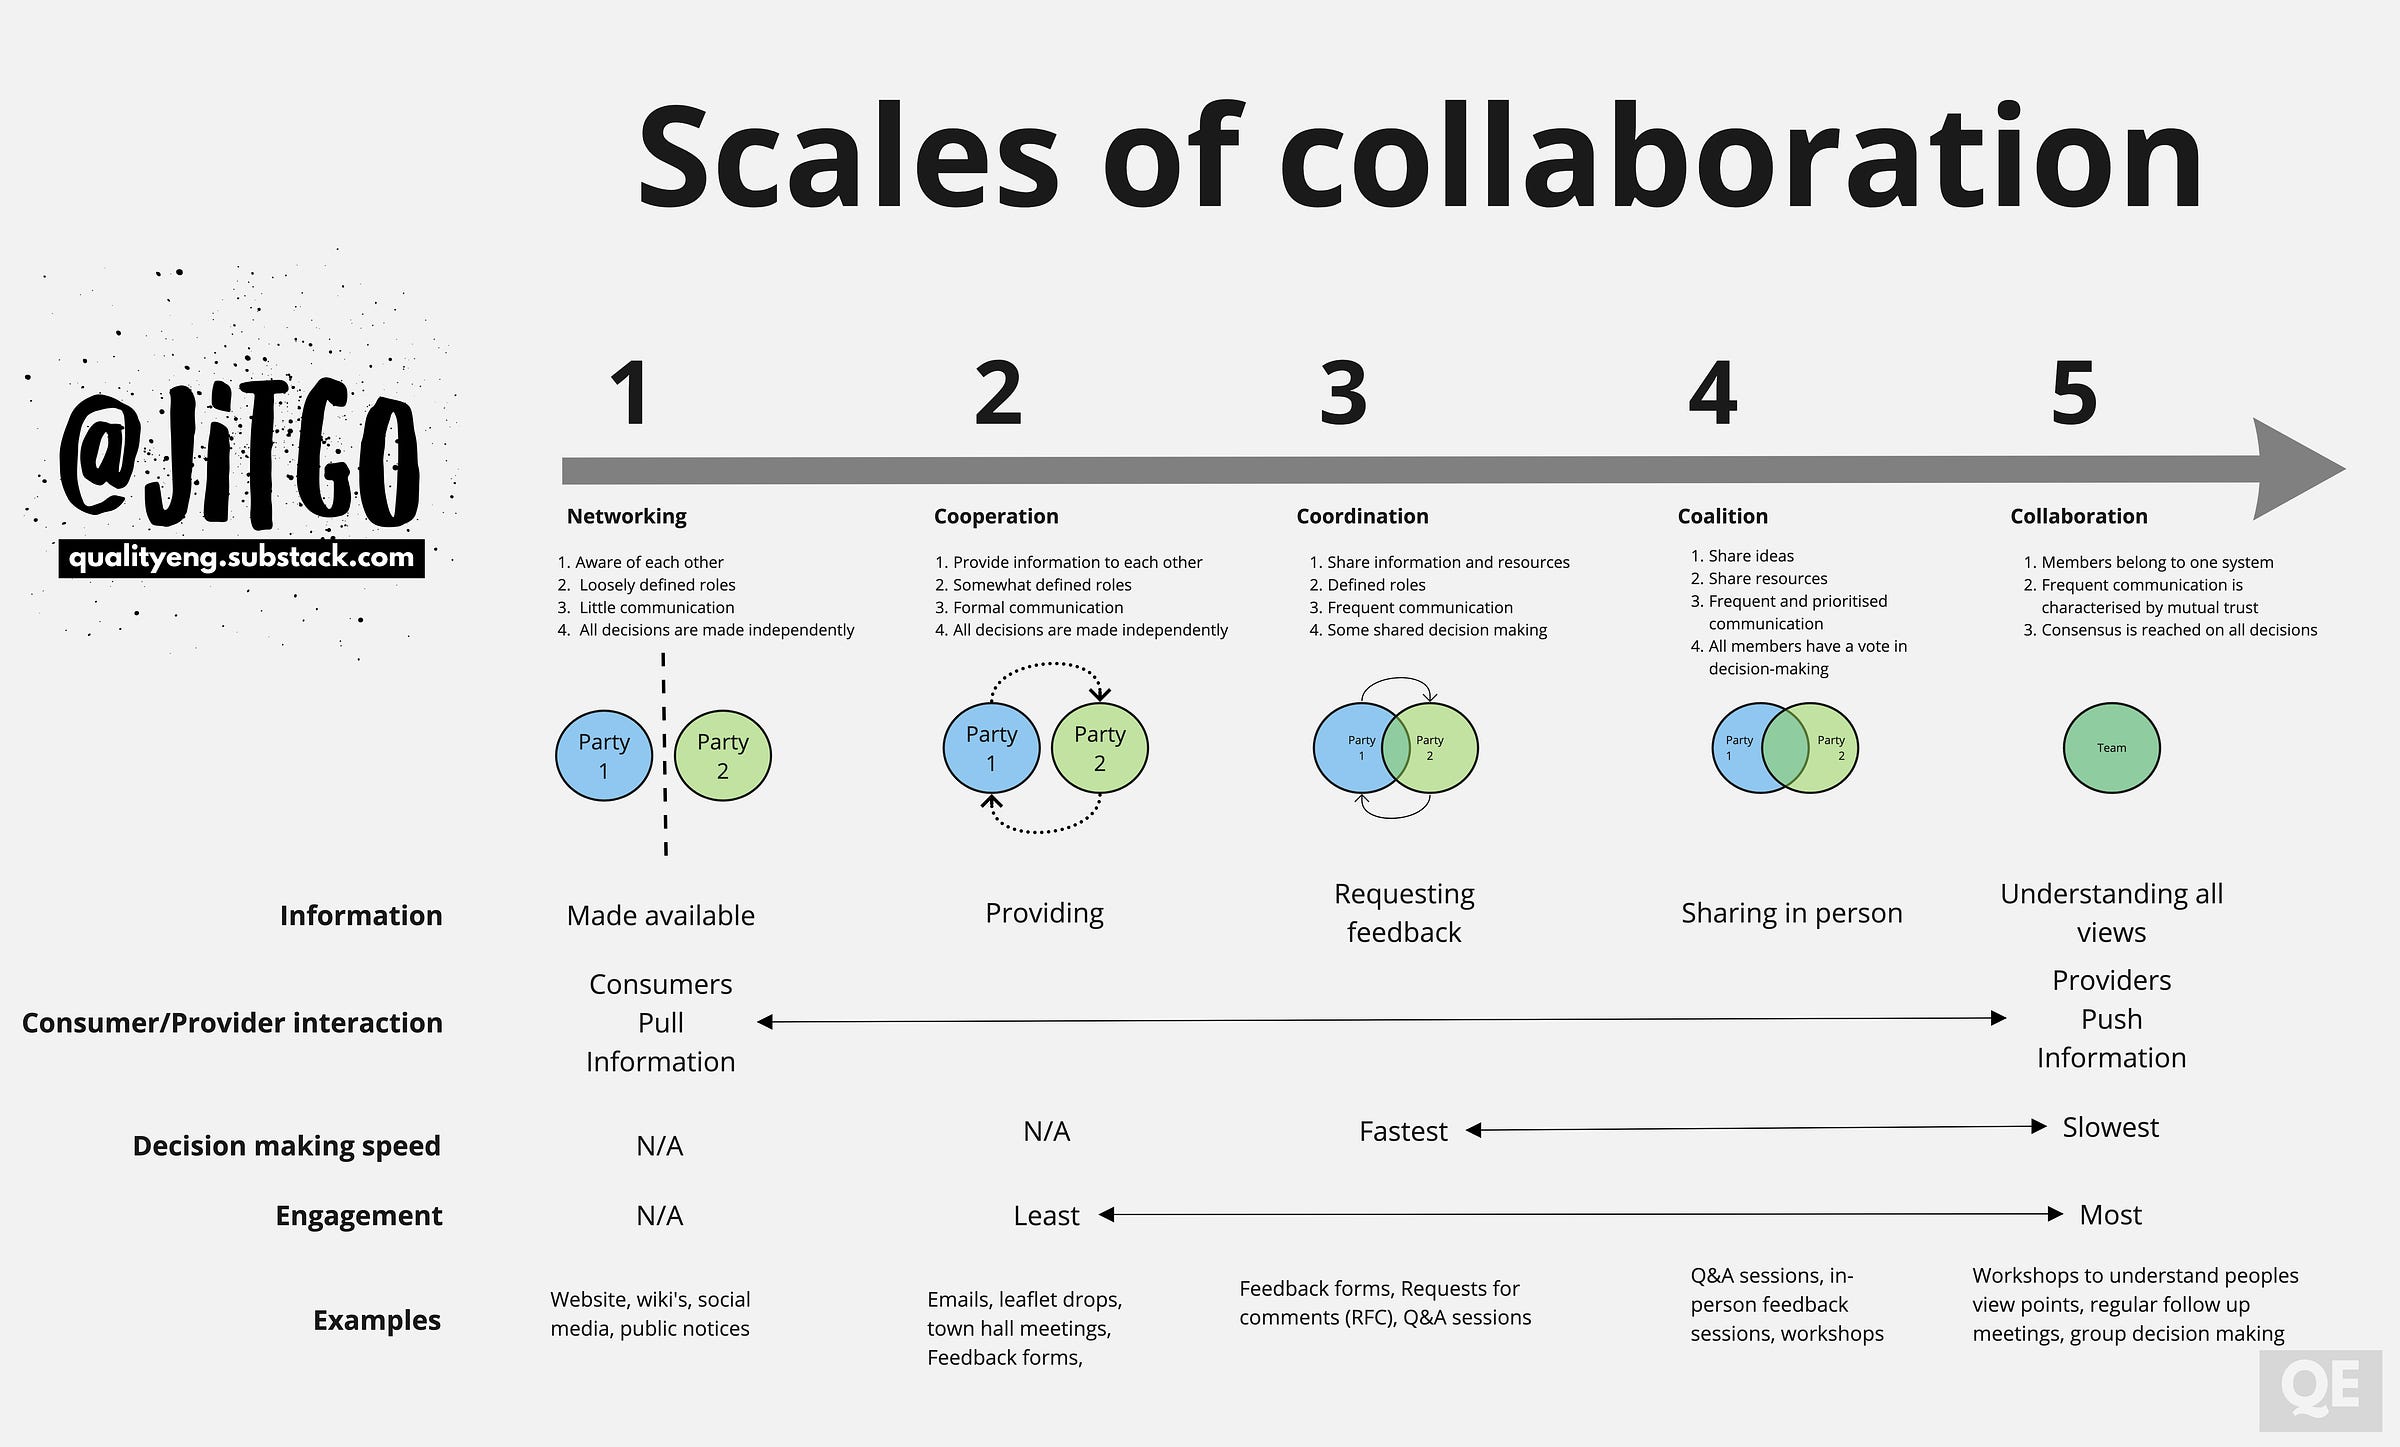 Scale running from 1 to 5 describing different levels of collaboration. From 1 - Networking, 2 - Cooperation, 3 - Coordination, 4 - Coalition and 5 - Collaboration